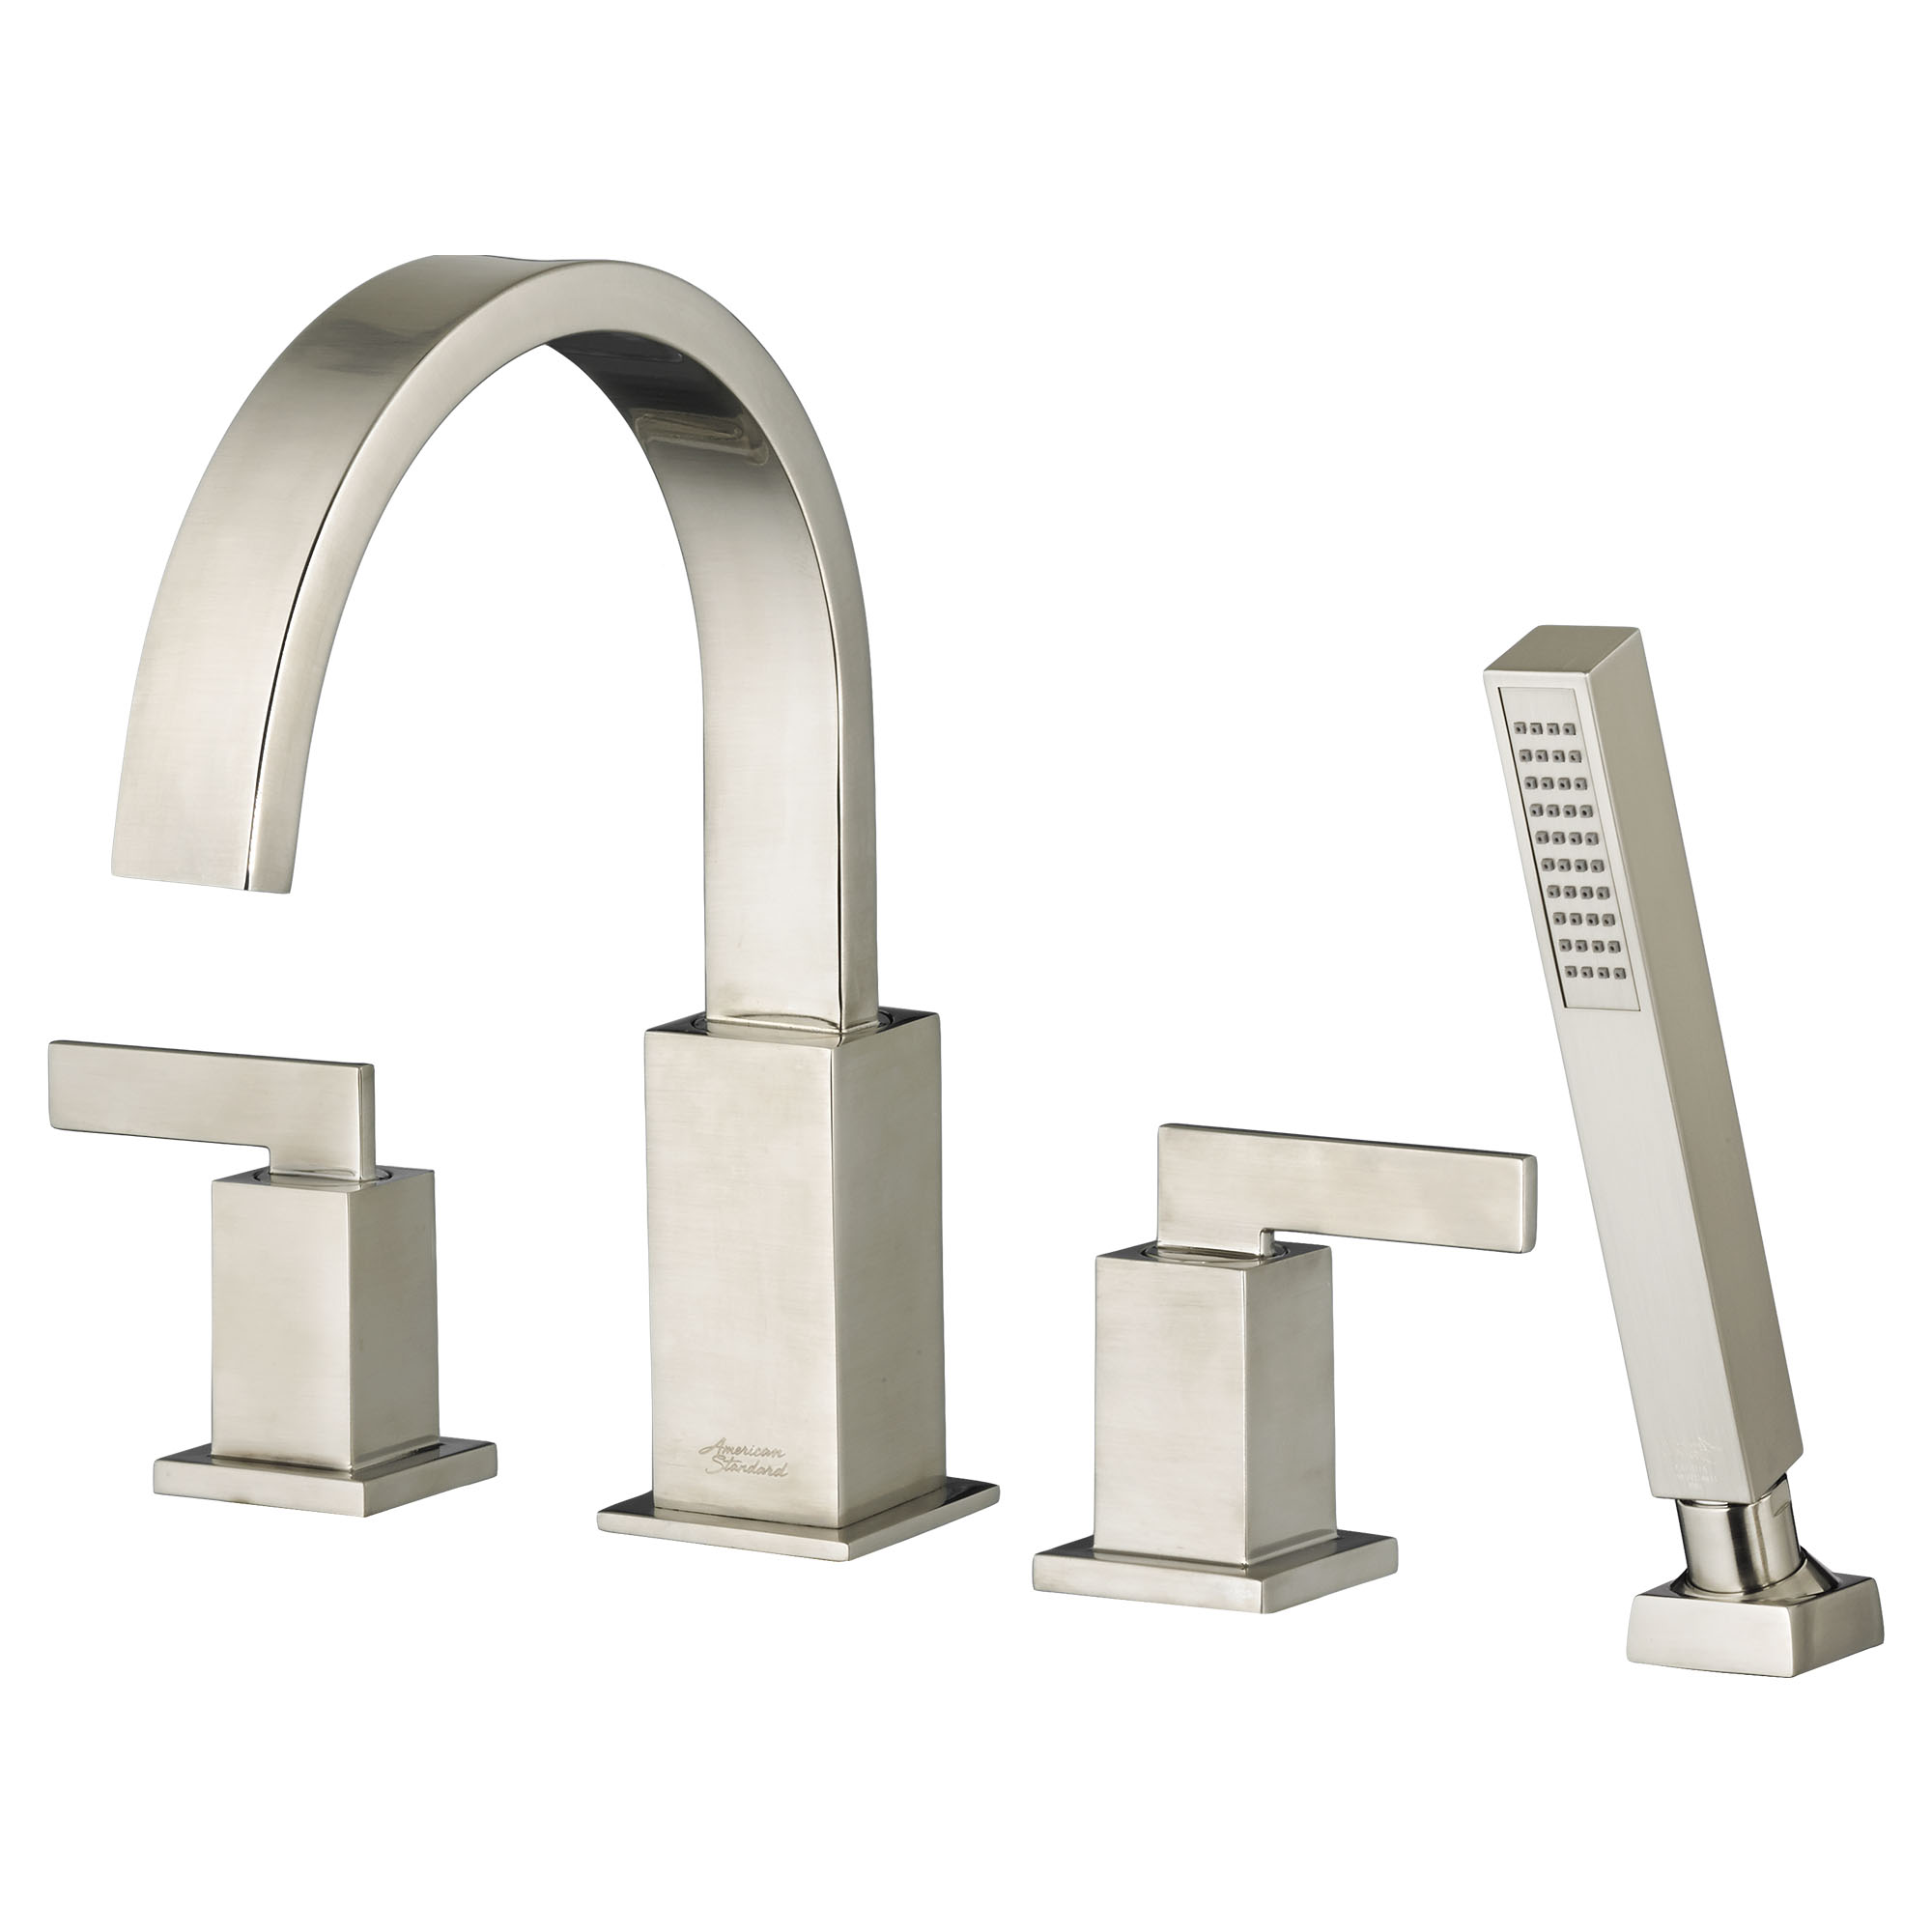 Time Square™ Bathtub Faucet With Lever Handles and Personal Shower for Flash™ Rough-In Valve